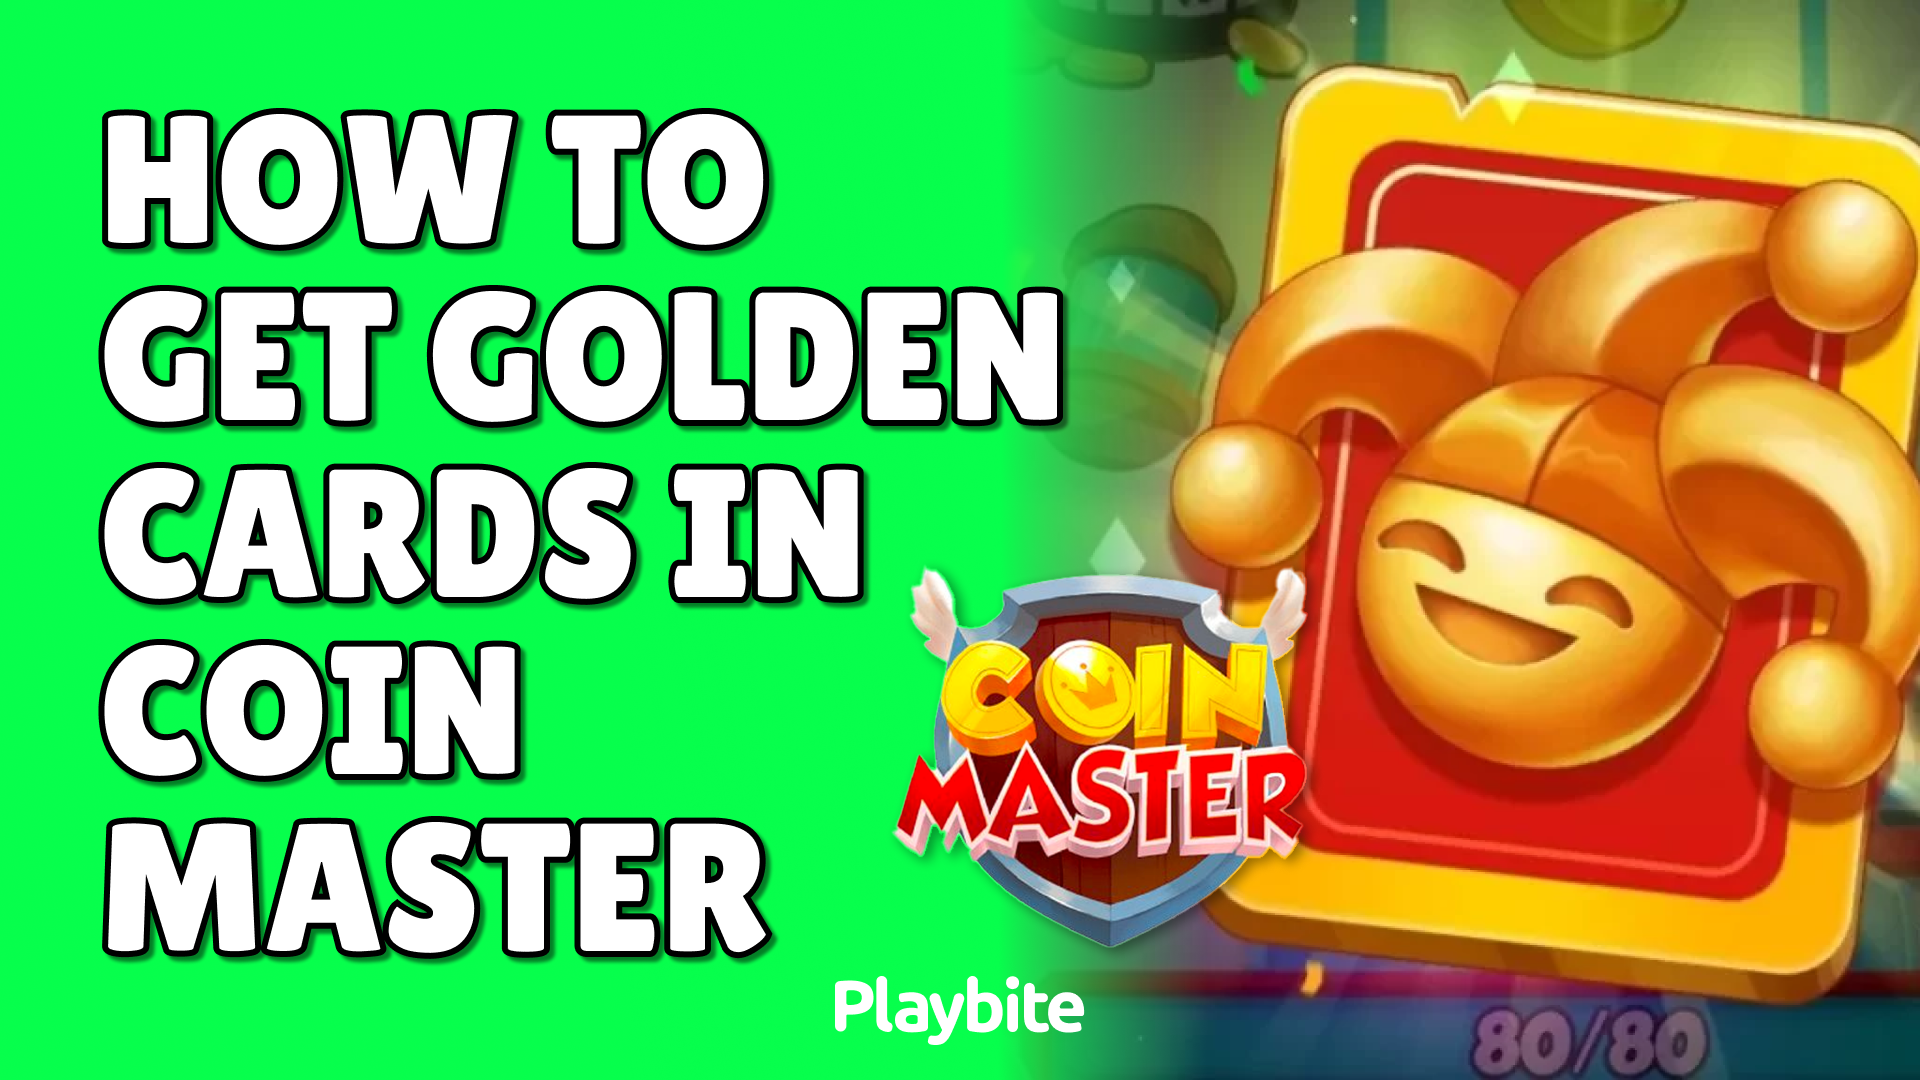 How to get golden card in coin master 